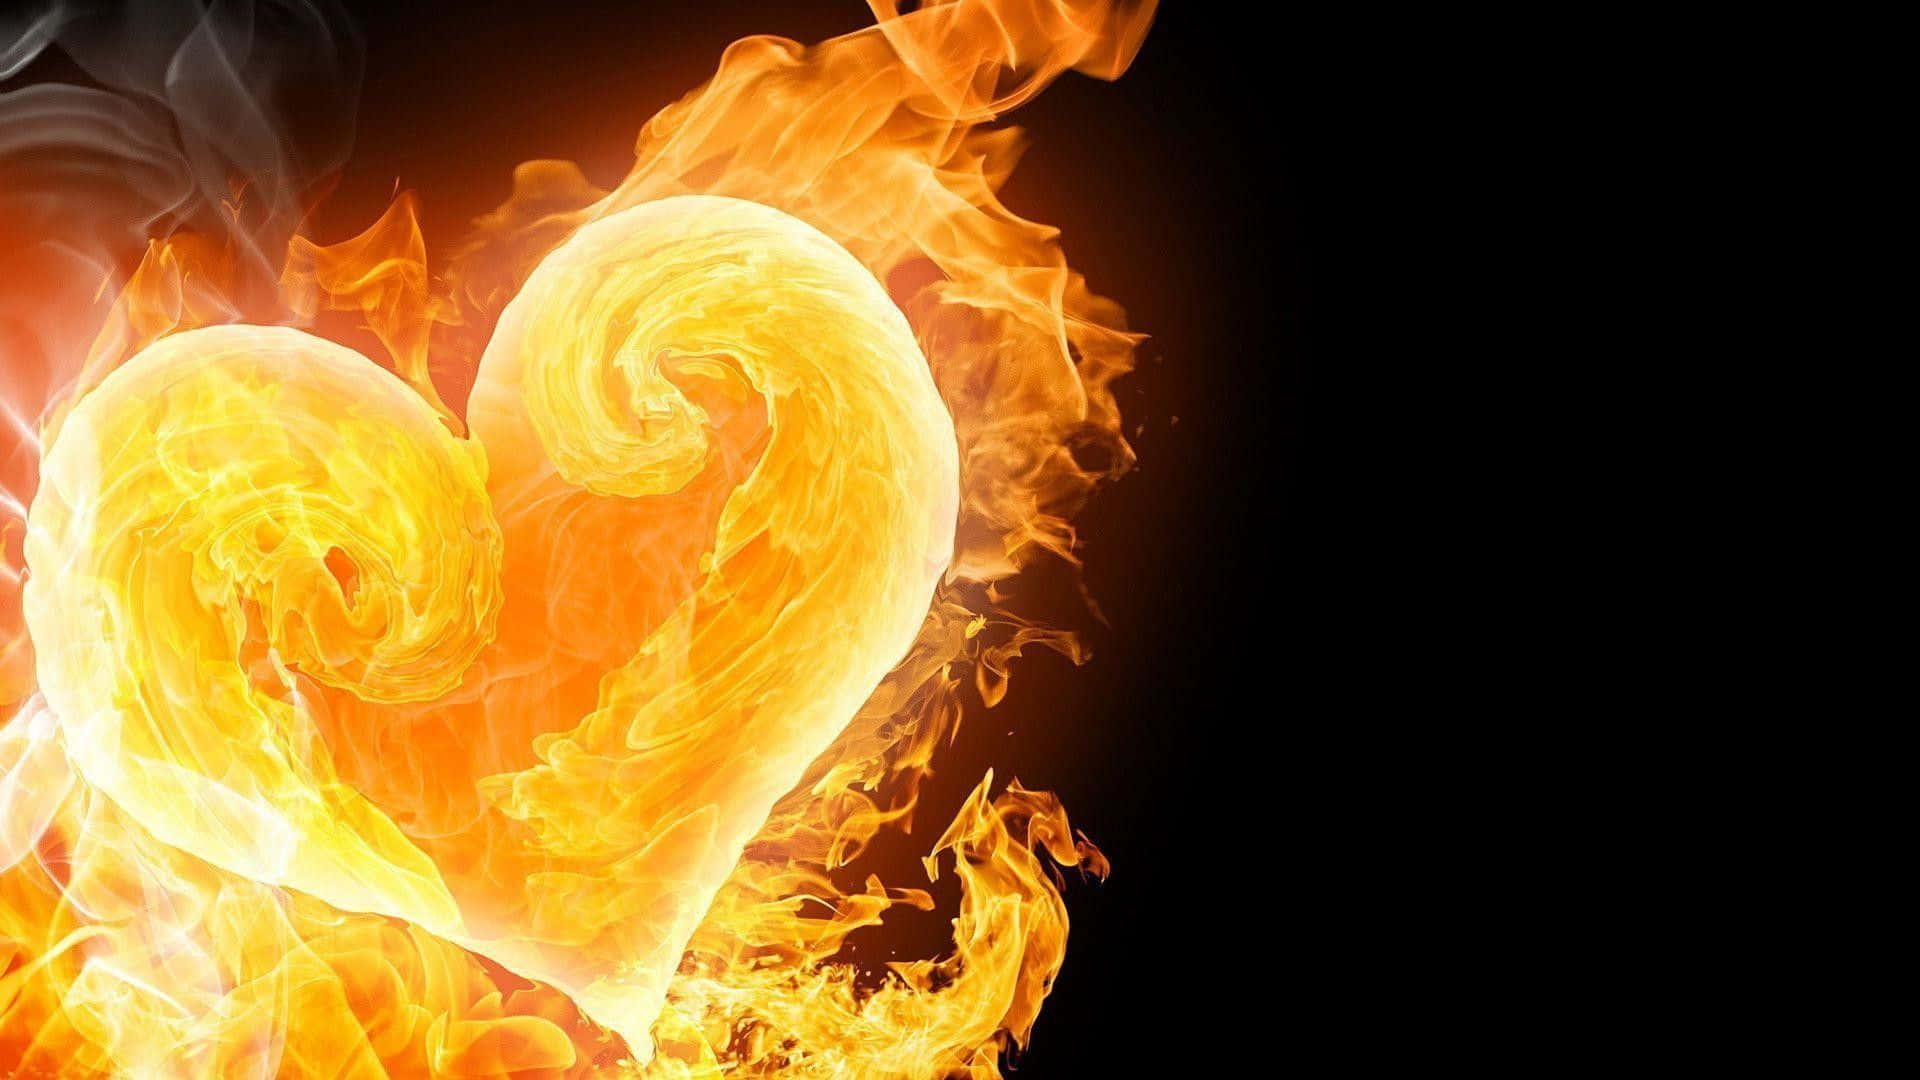 a heart shaped flame on a black background Wallpaper